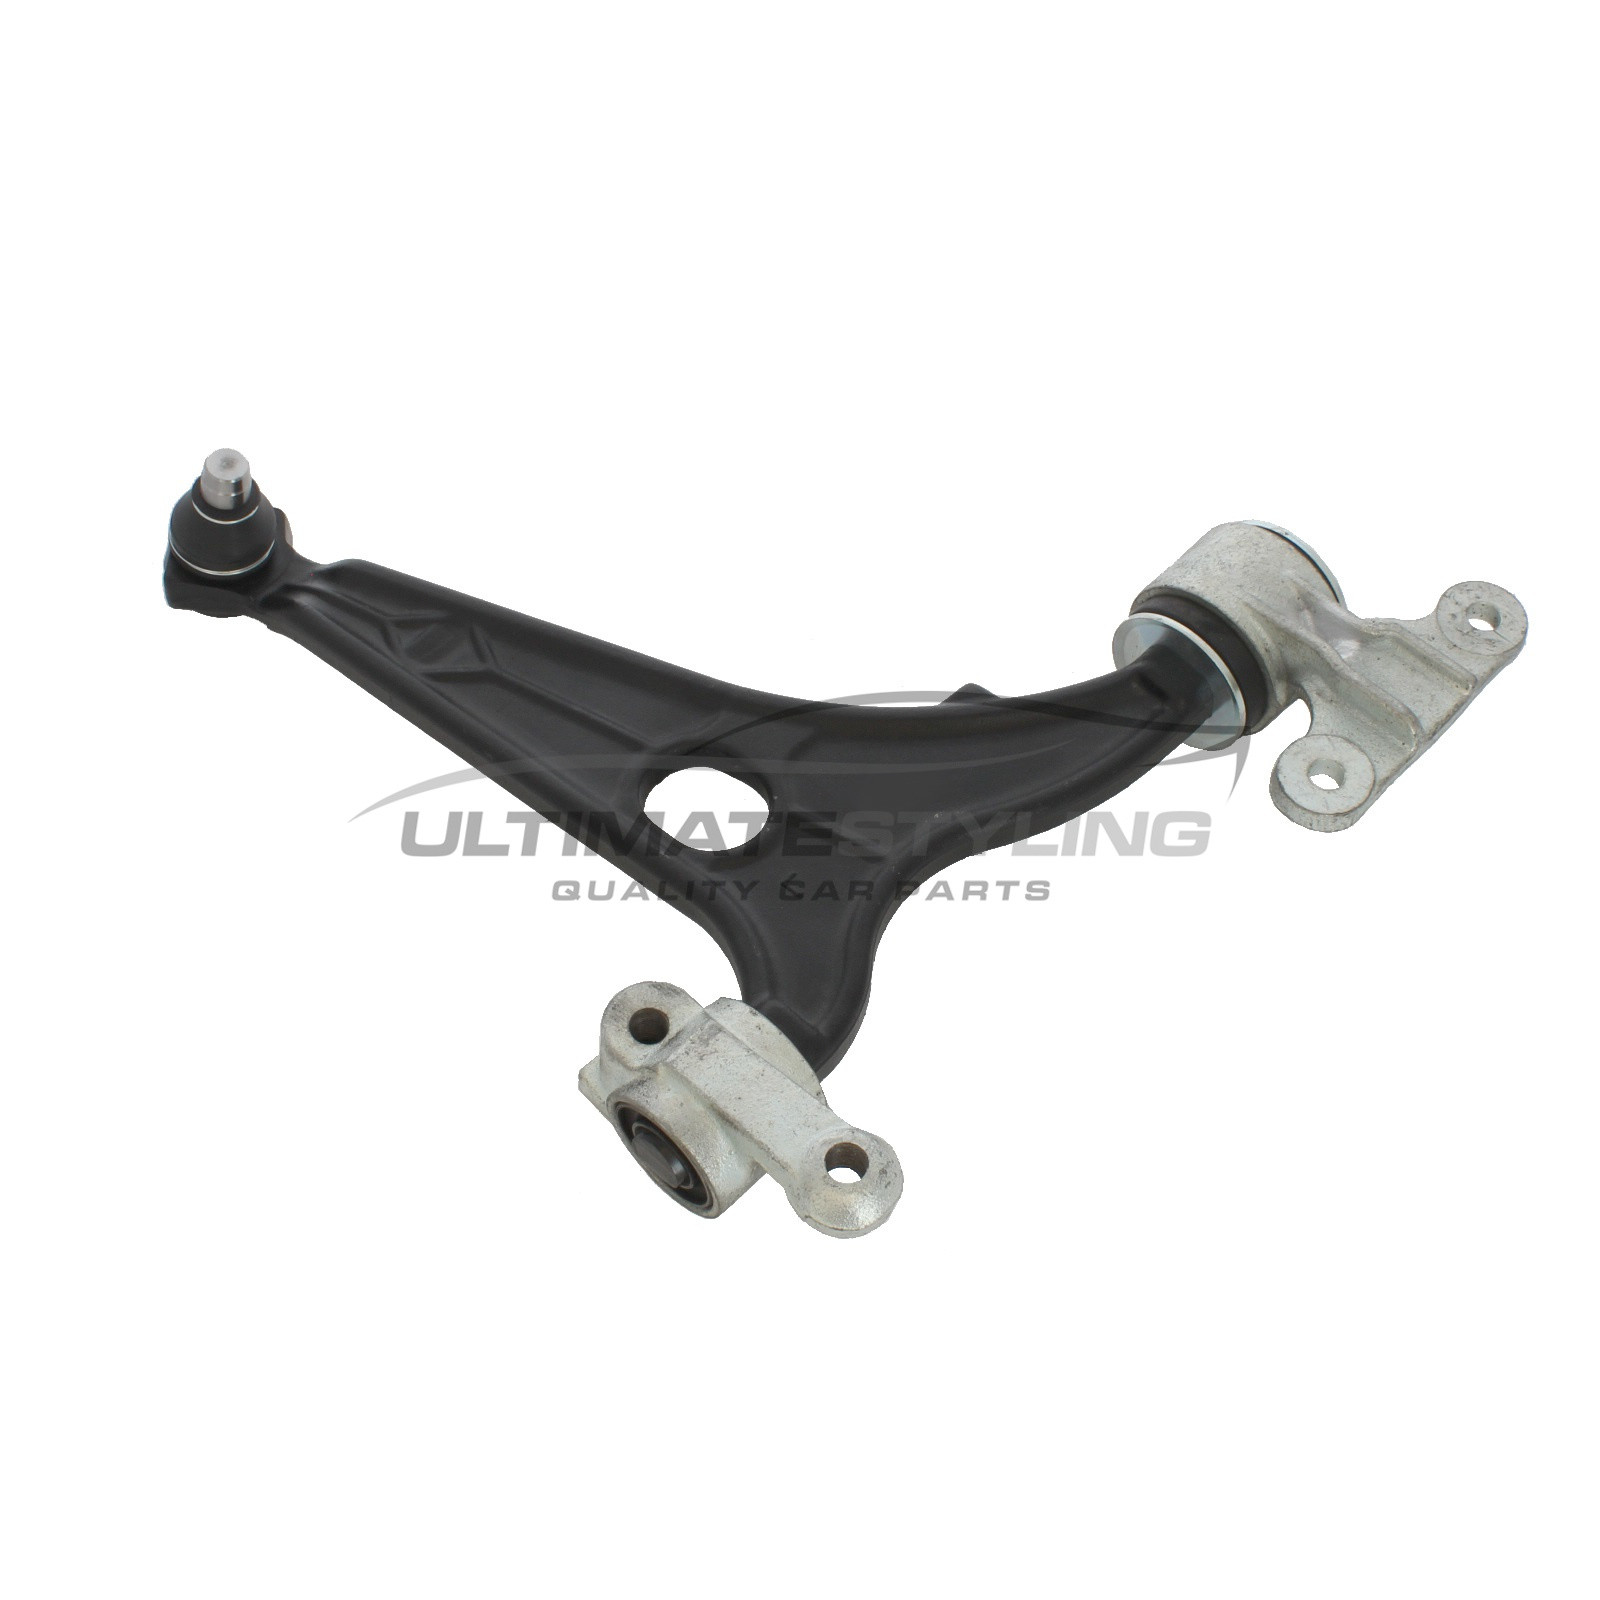 Citroen Dispatch 2007-2017, Fiat Scudo 2007-2017, Peugeot Expert 2007-2017, Toyota Proace 2013-2017 Front Lower Suspension Arm (Steel) Including Ball Joint and Rear Bush Driver Side (RH)